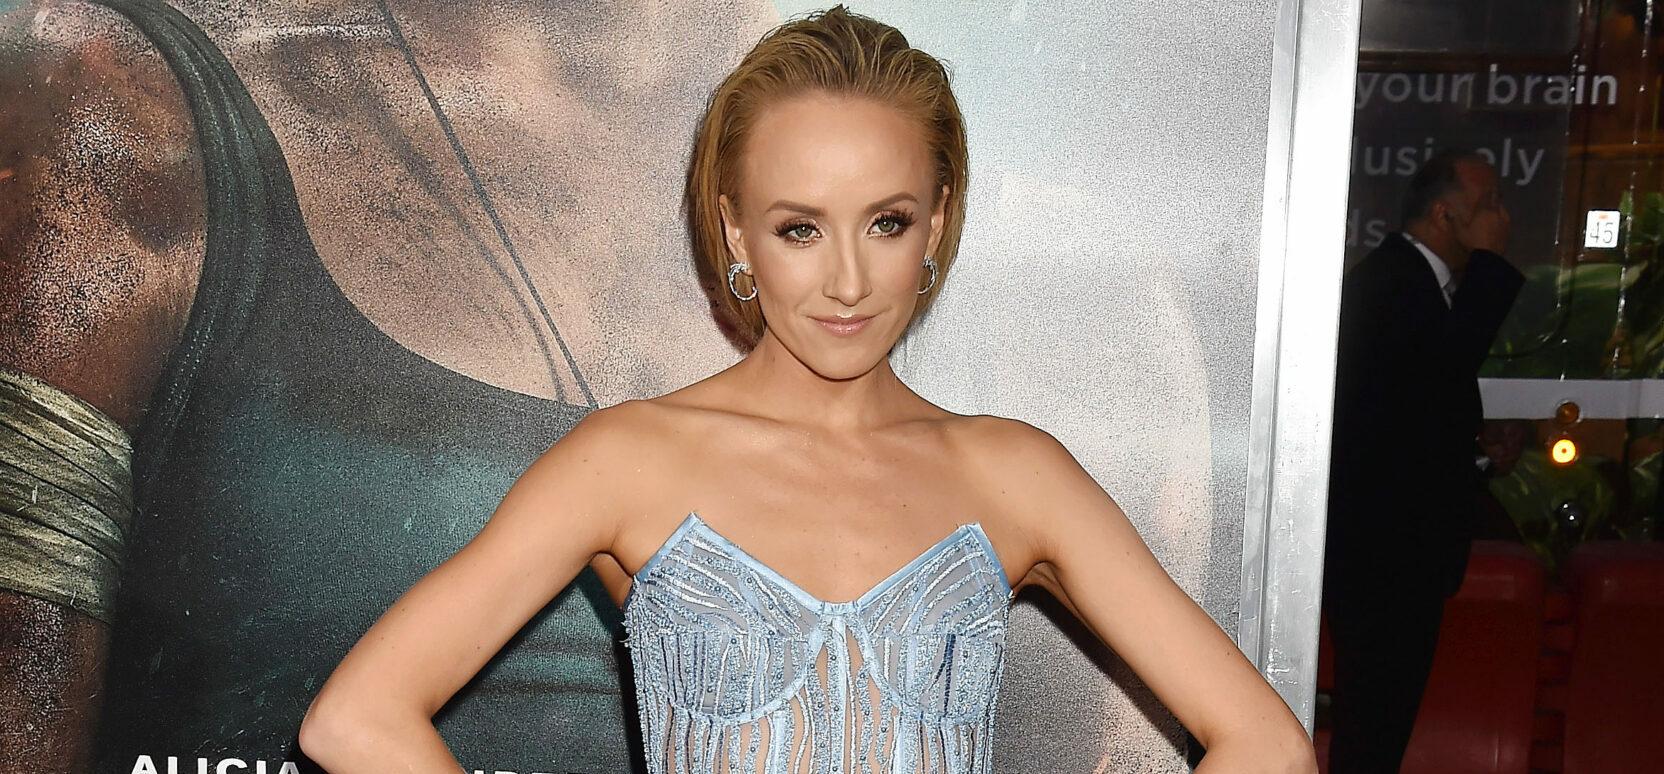 Nastia Liukin Disables Comments Amid Weight Loss Concerns